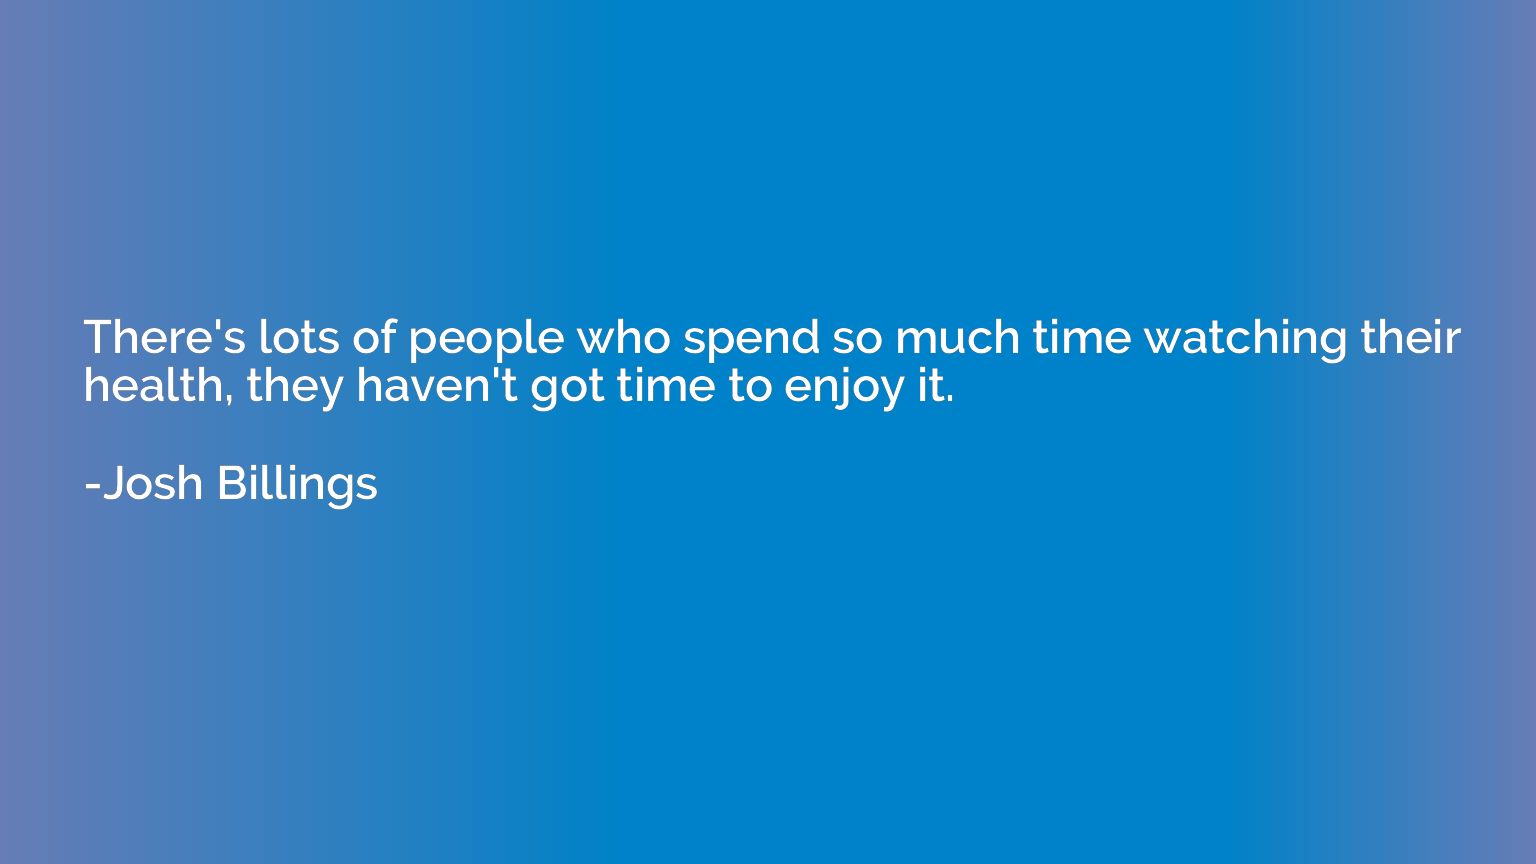 There's lots of people who spend so much time watching their